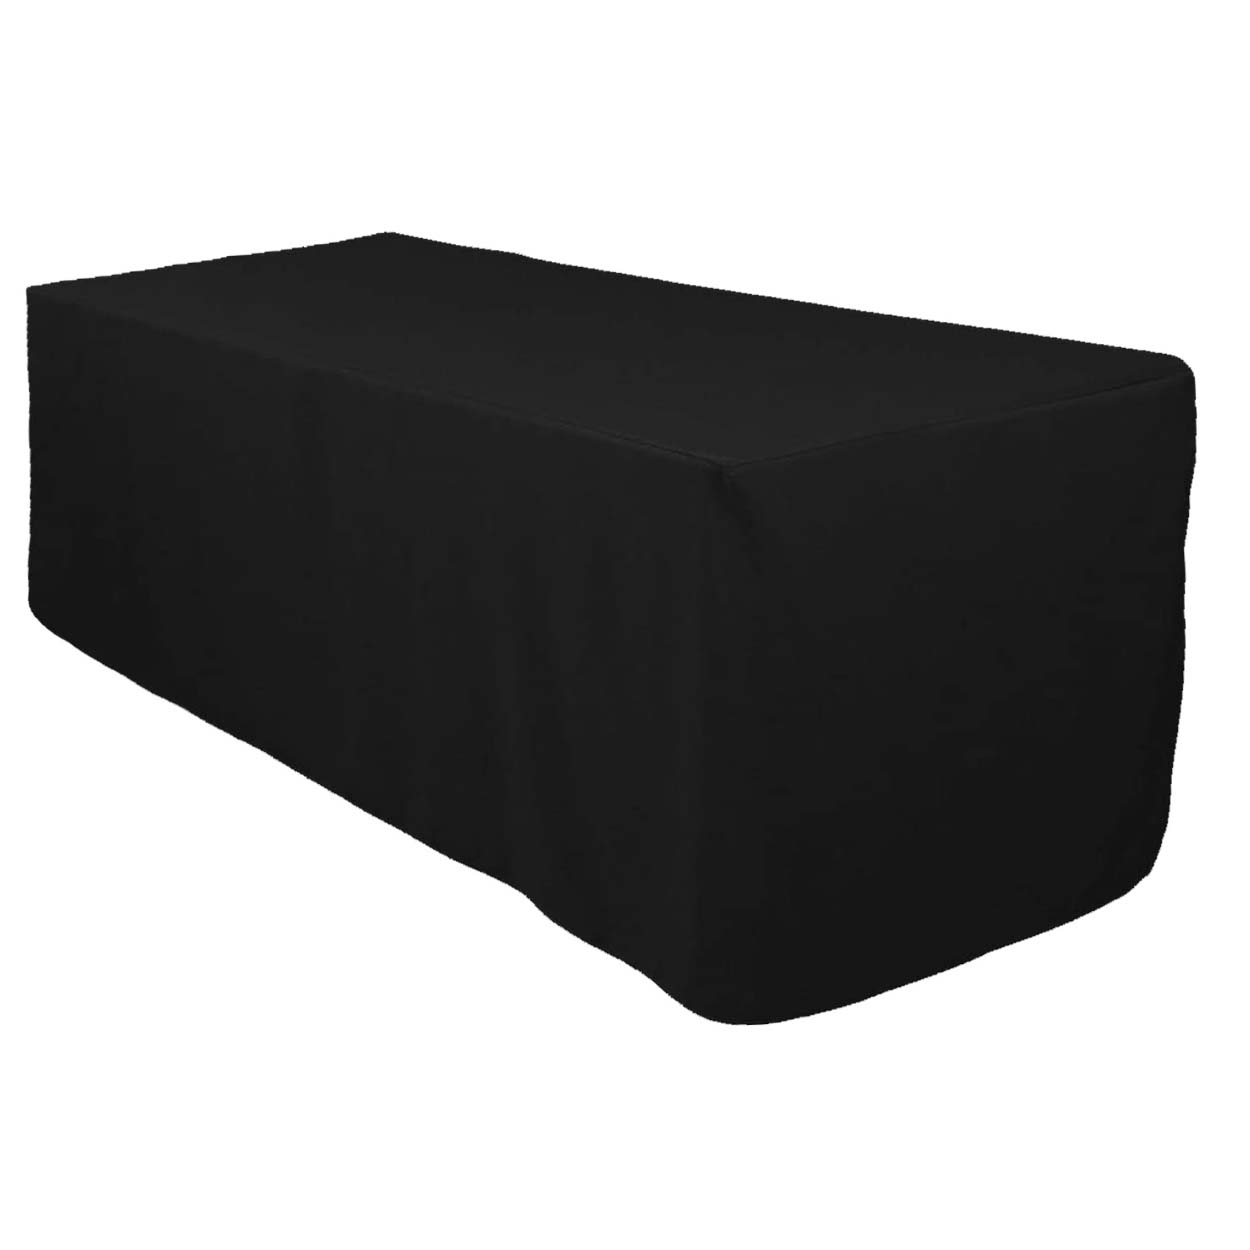 Product Details: Classic Table Cloth